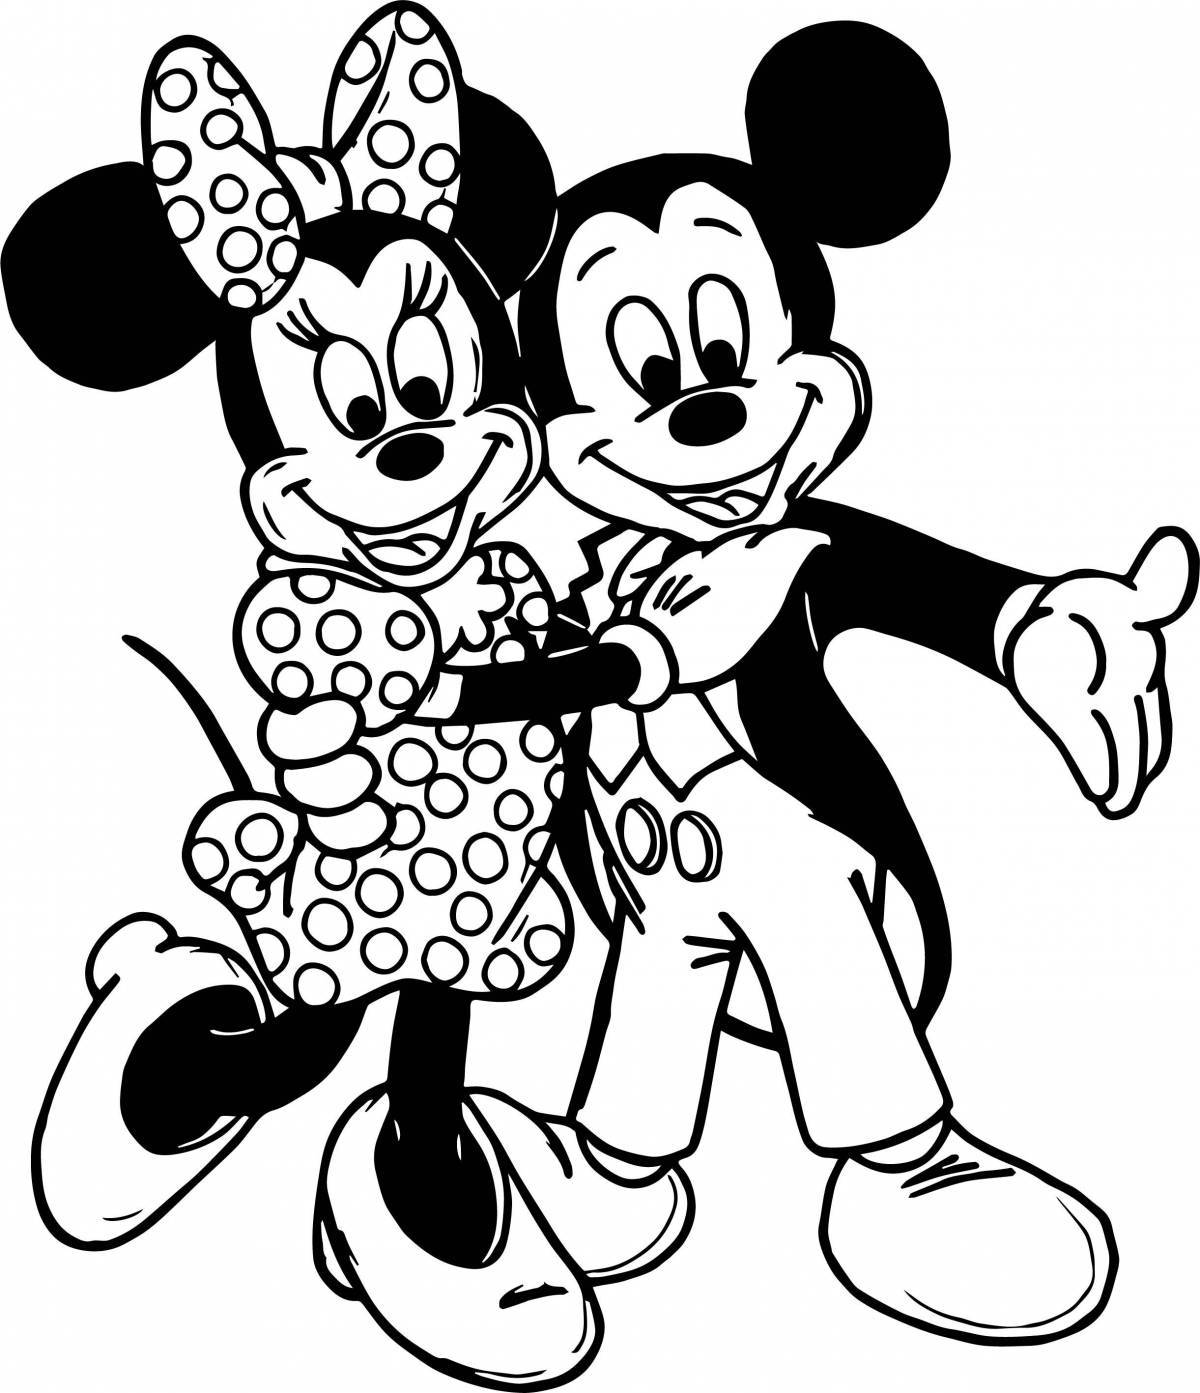 Coloring page joyful mickey mouse